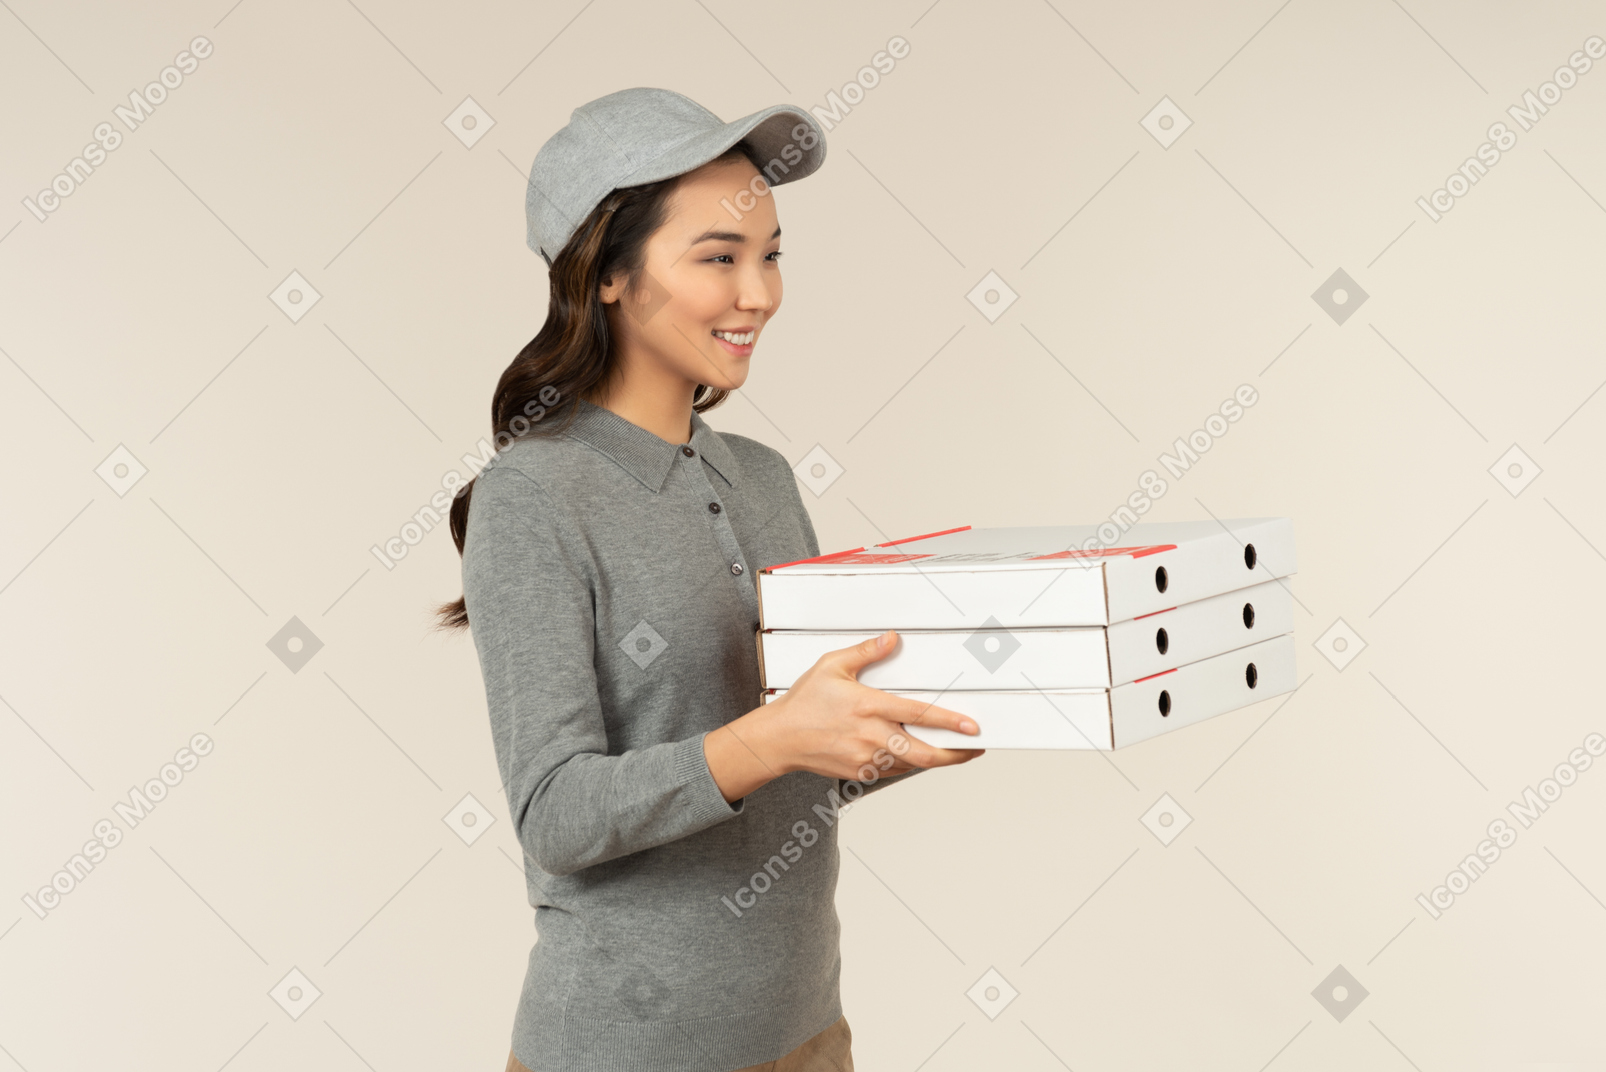 Here you have your pizza